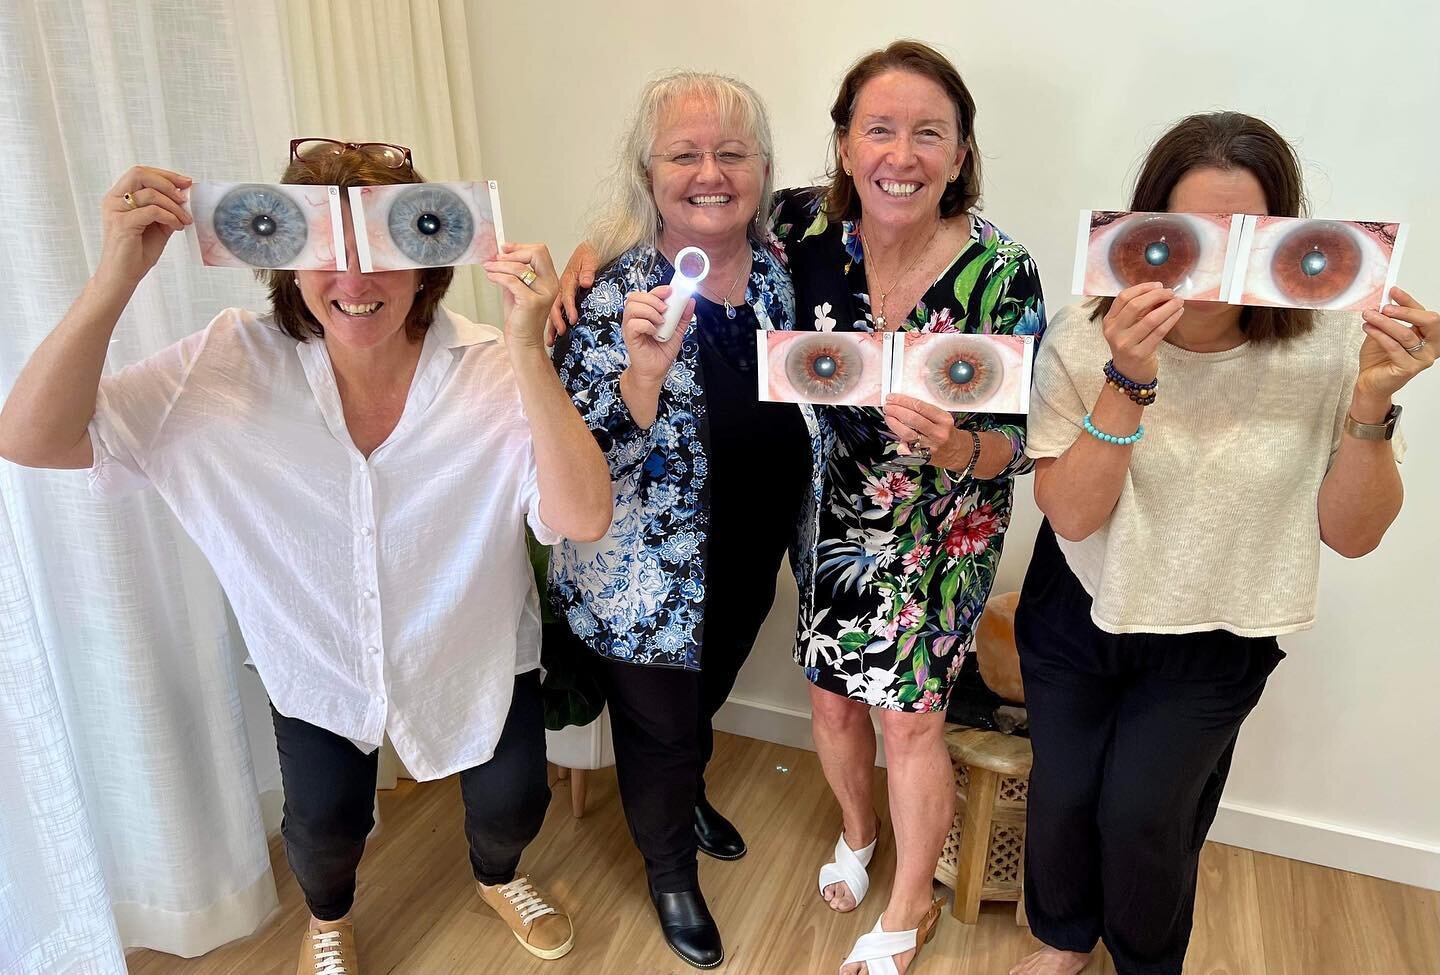 Getting photos of our eyes taken for our iridology class. So lovely to meet some of my class mates and thank you to @lisconlon_herbalist and her hubby Brett. #etre #w#iris #iridology #eyes